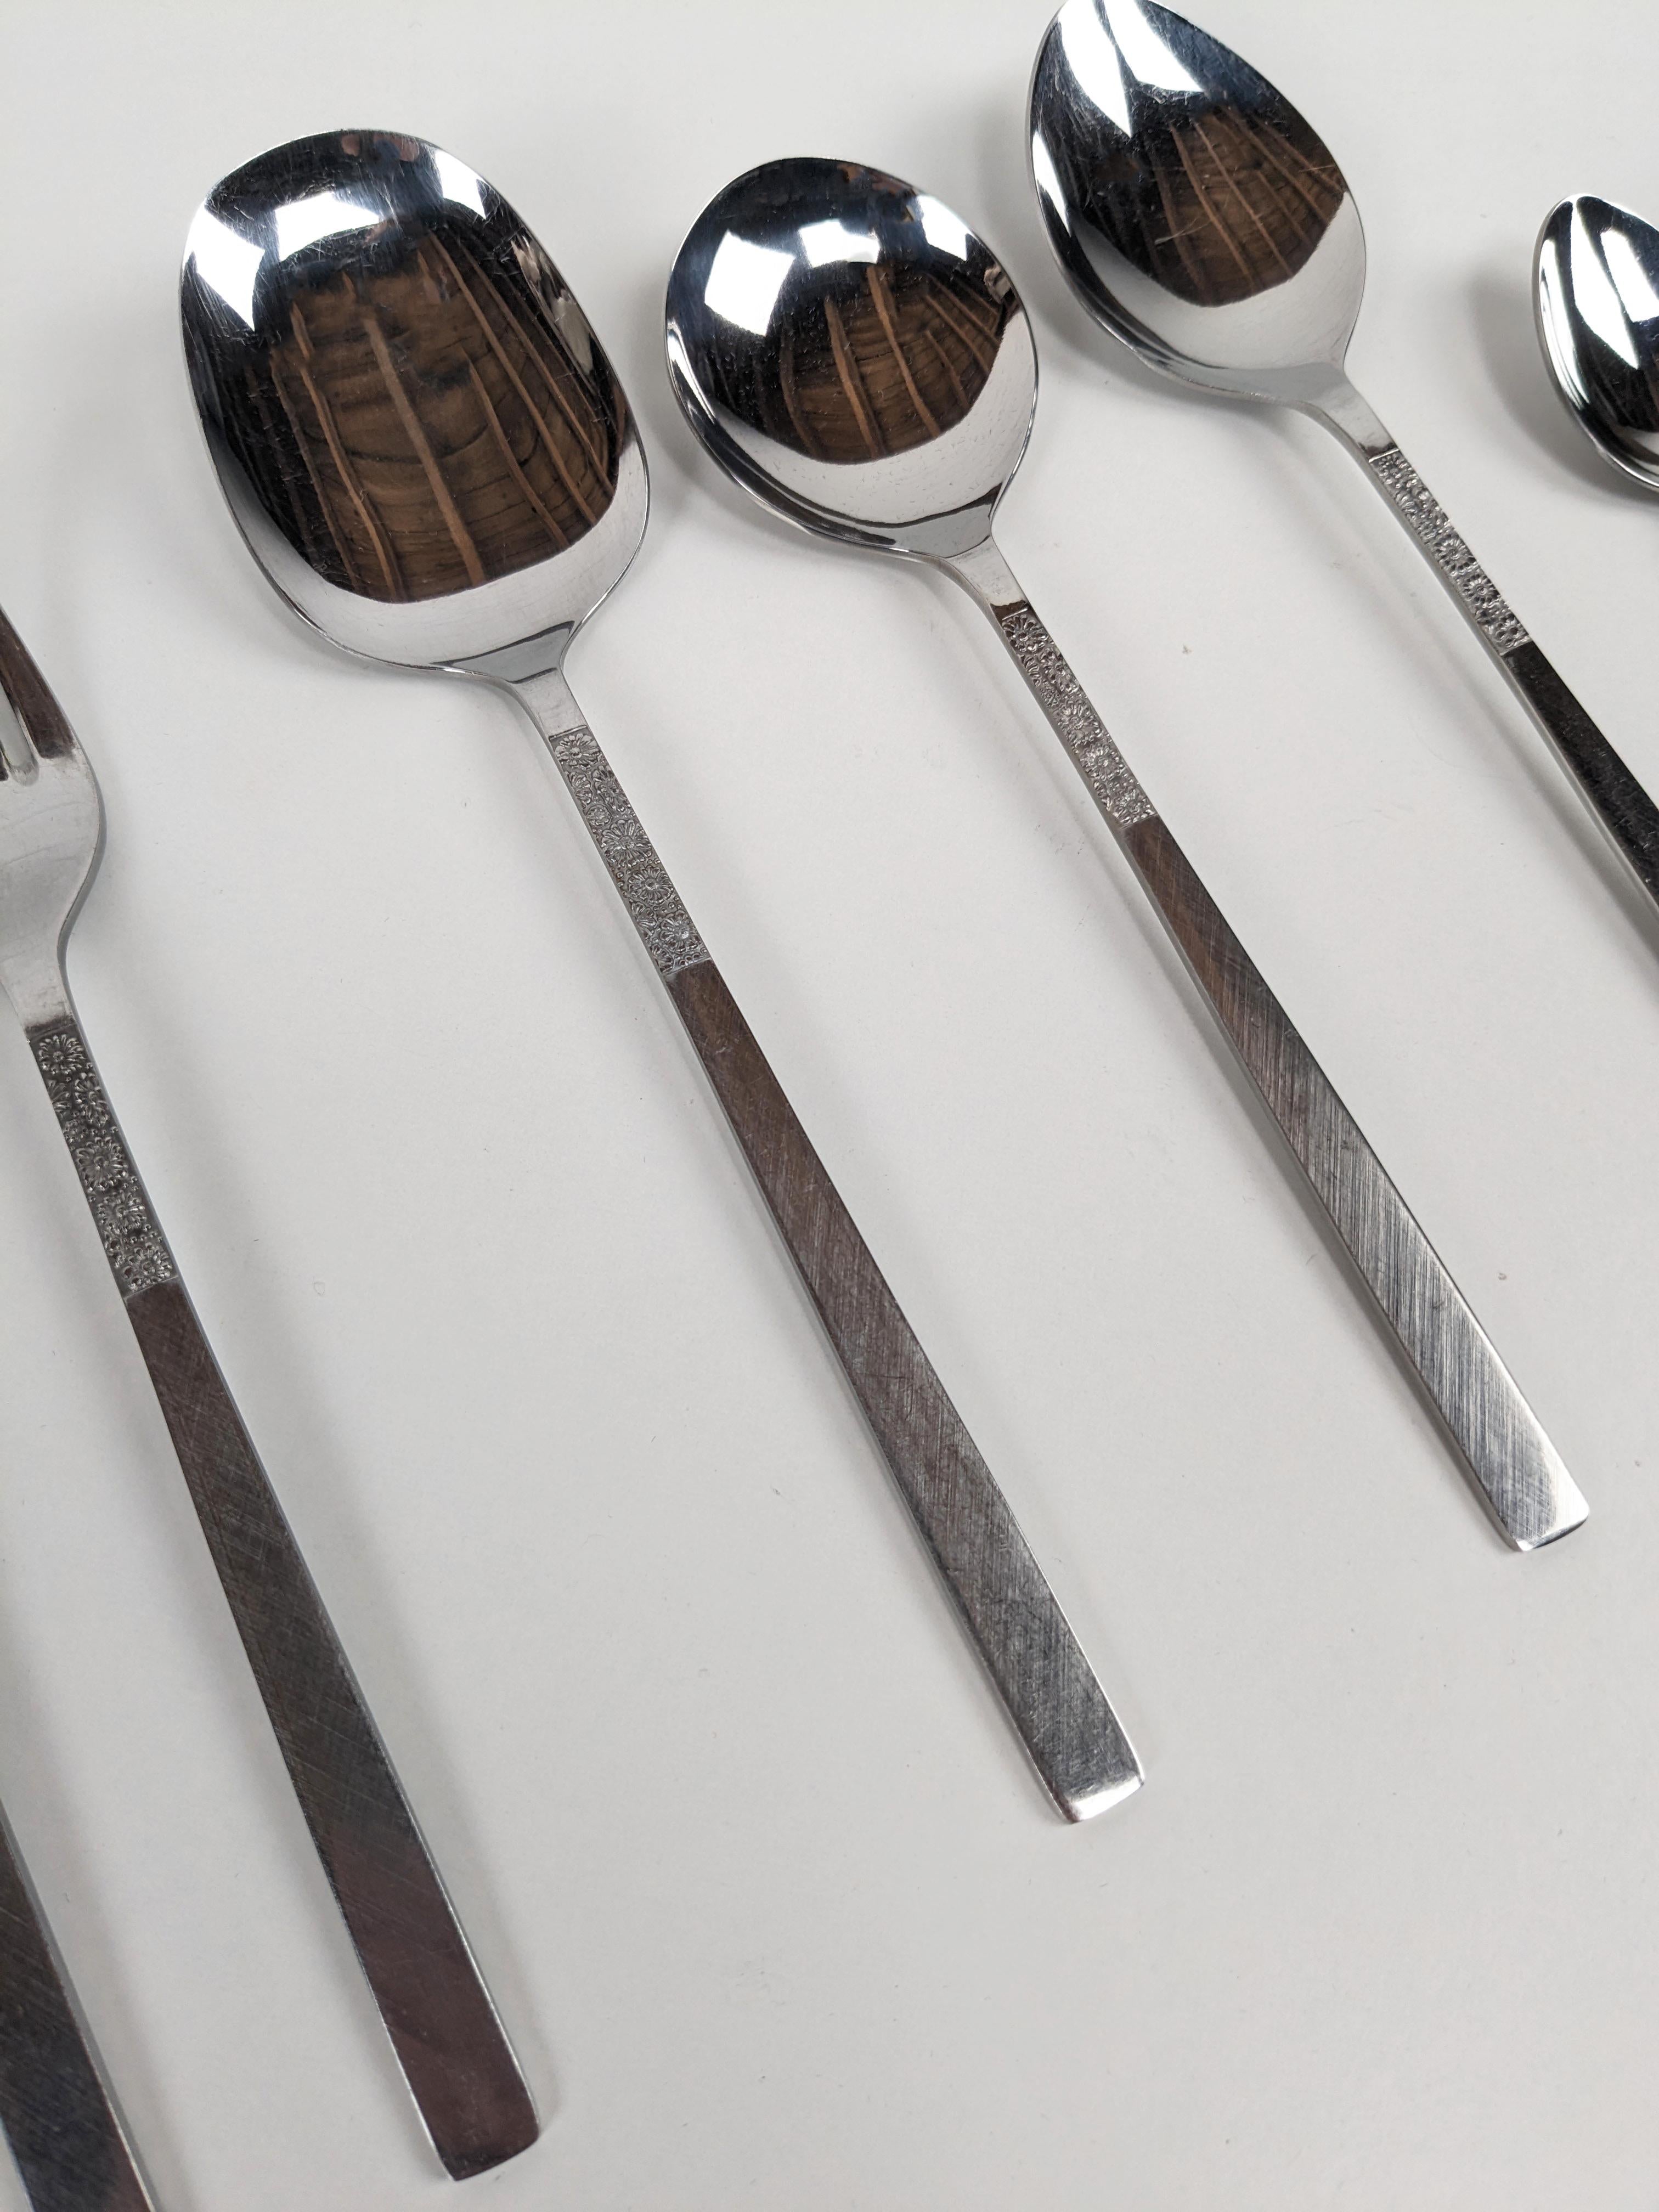 Viners ‘Love Story’ cutlery, Presentation set, stainless steel, 44 pc, 1970s 1